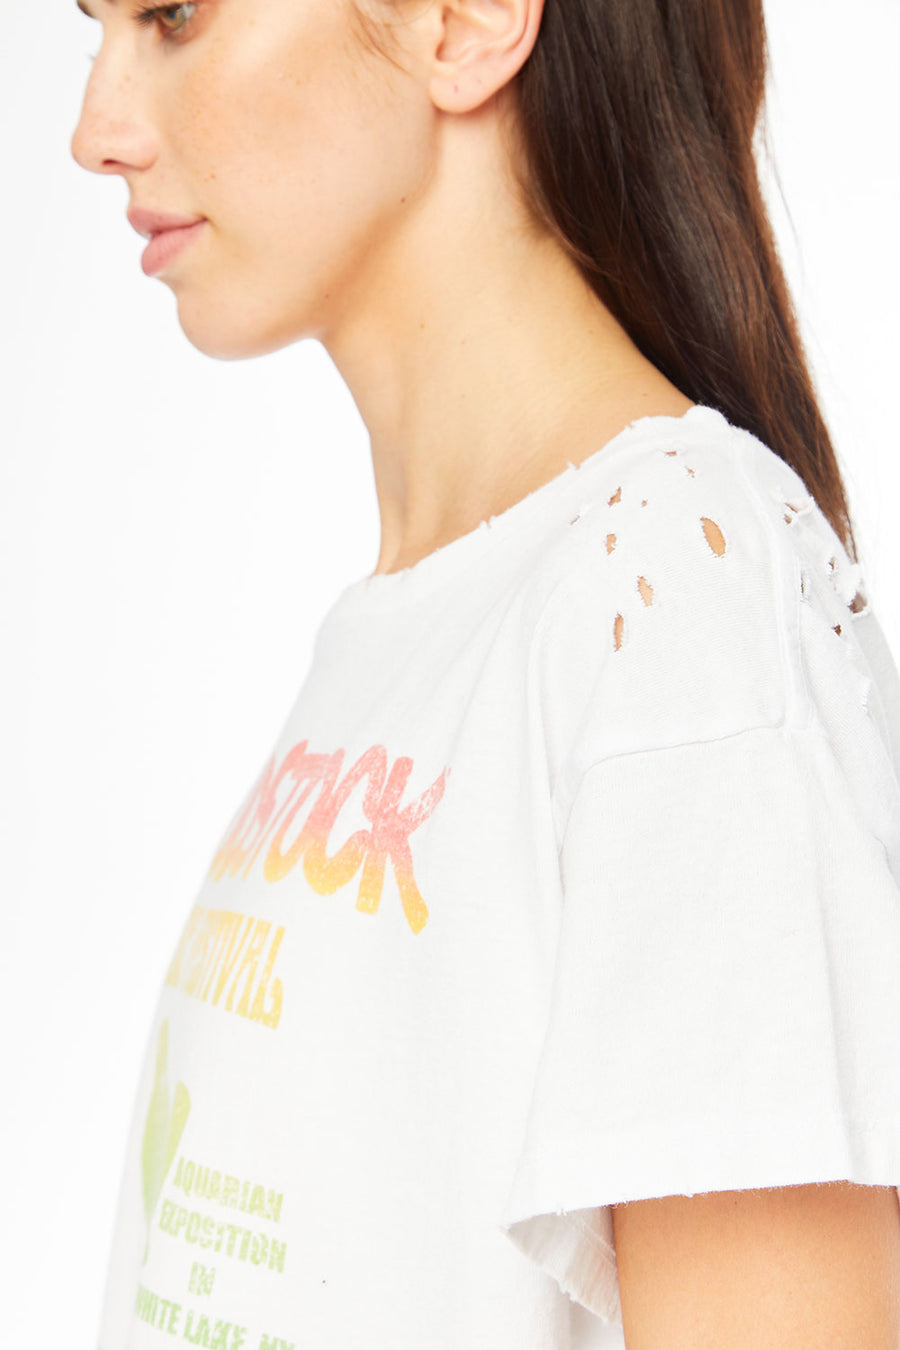 Woodstock - "Music Festival" Distressed Crew Neck WOMENS chaserbrand